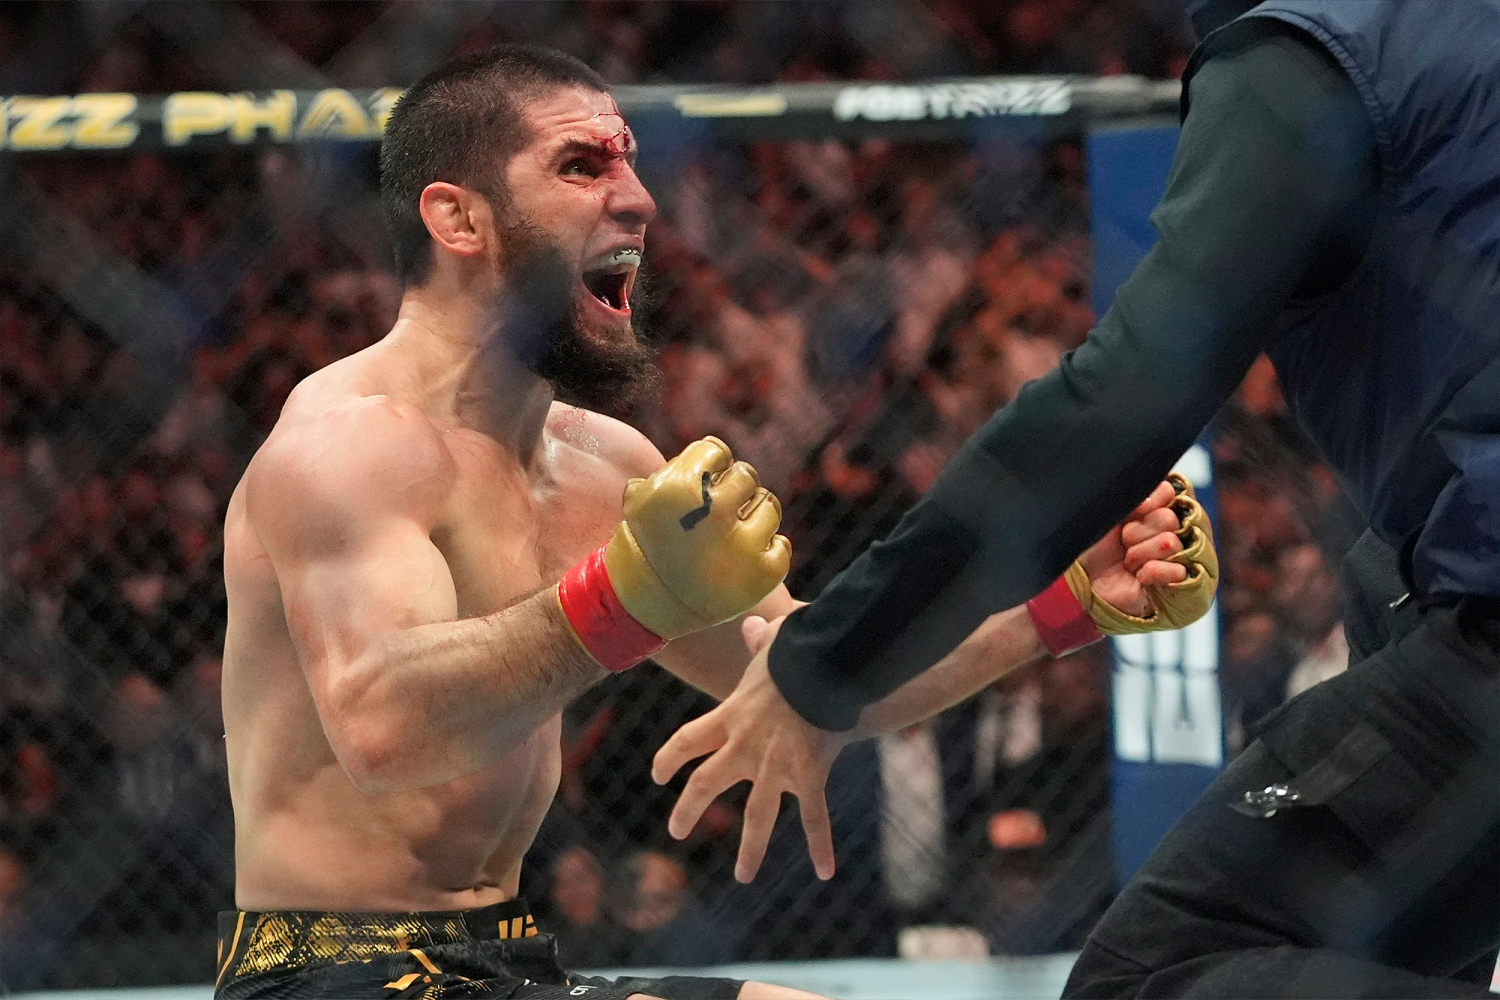 Makhachev submits Poirier at UFC 302 to defend lightweight title